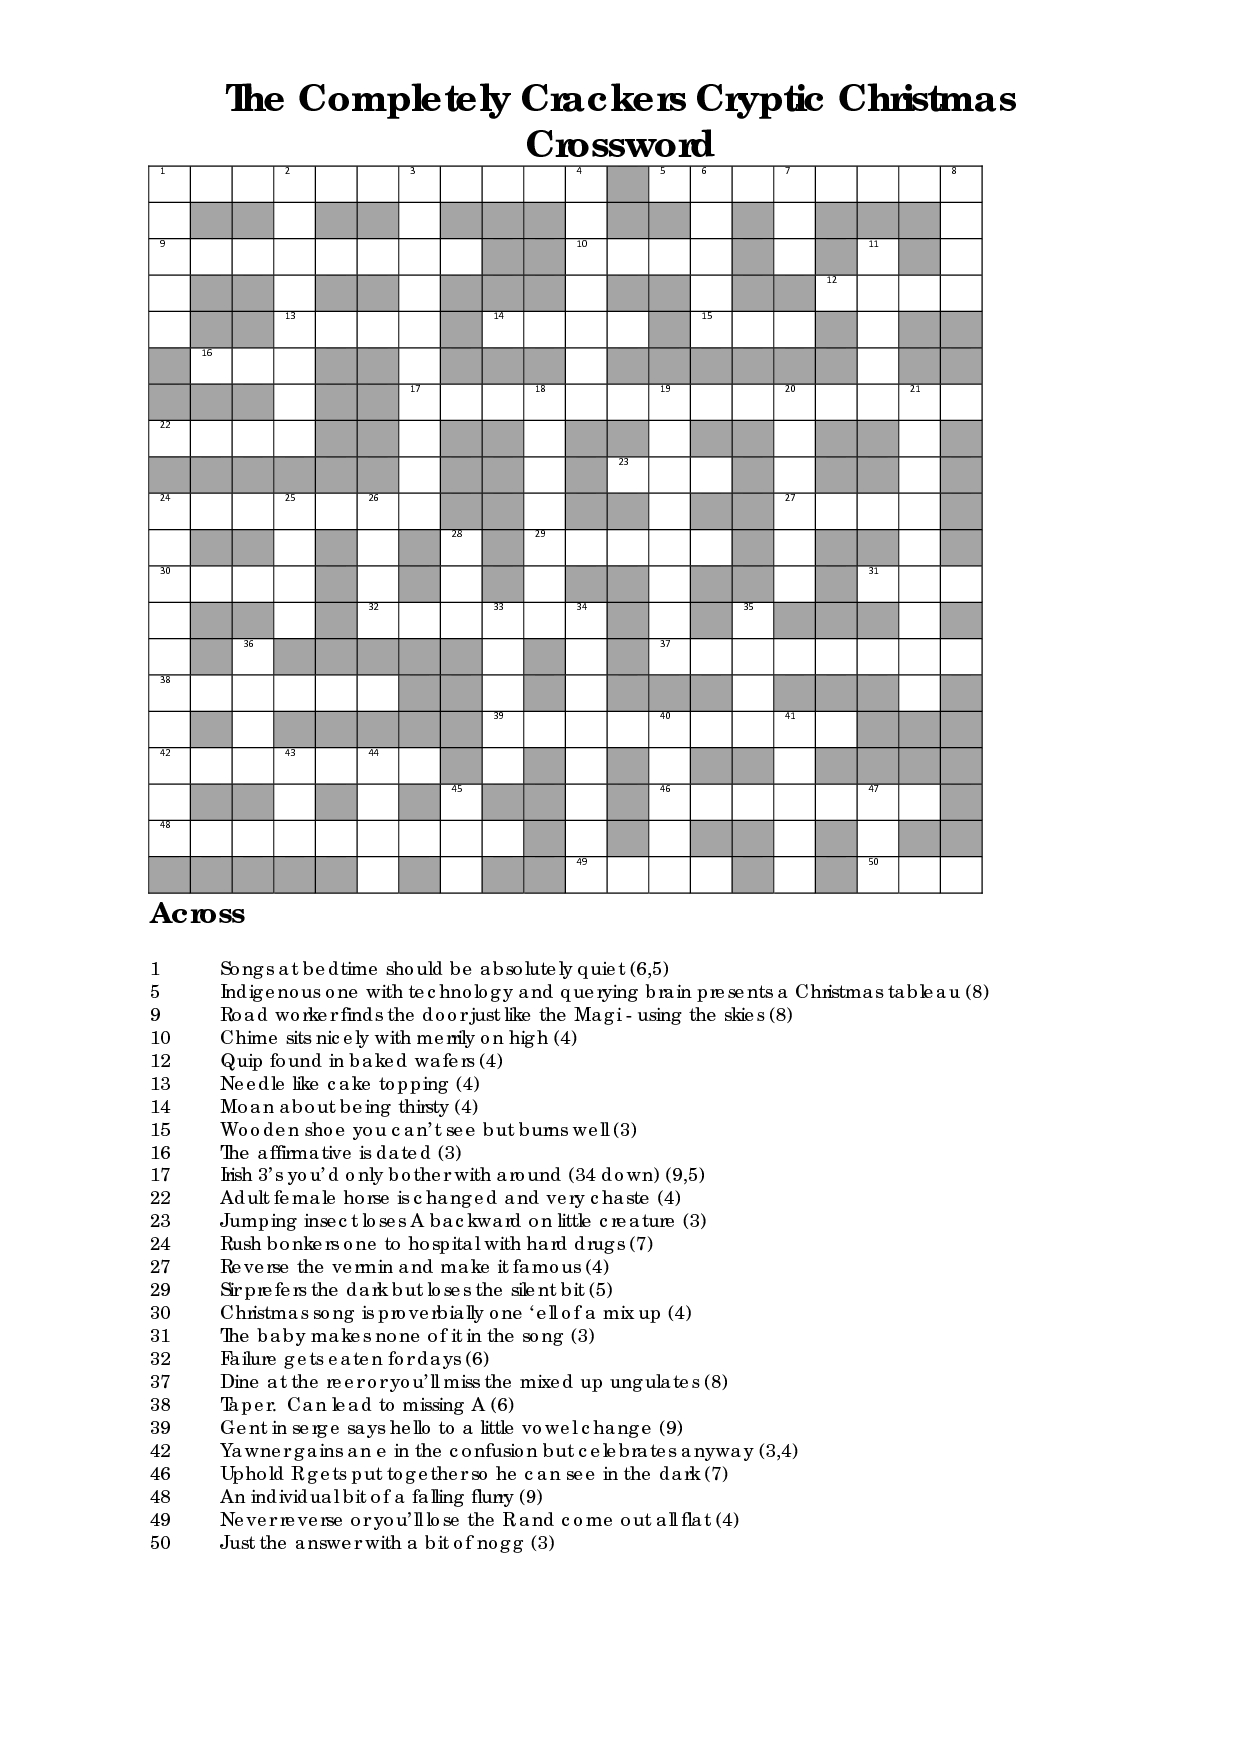 Christmas Crossword Puzzles To Print | The Completely Crackers - Printable Cryptic Crossword Puzzles